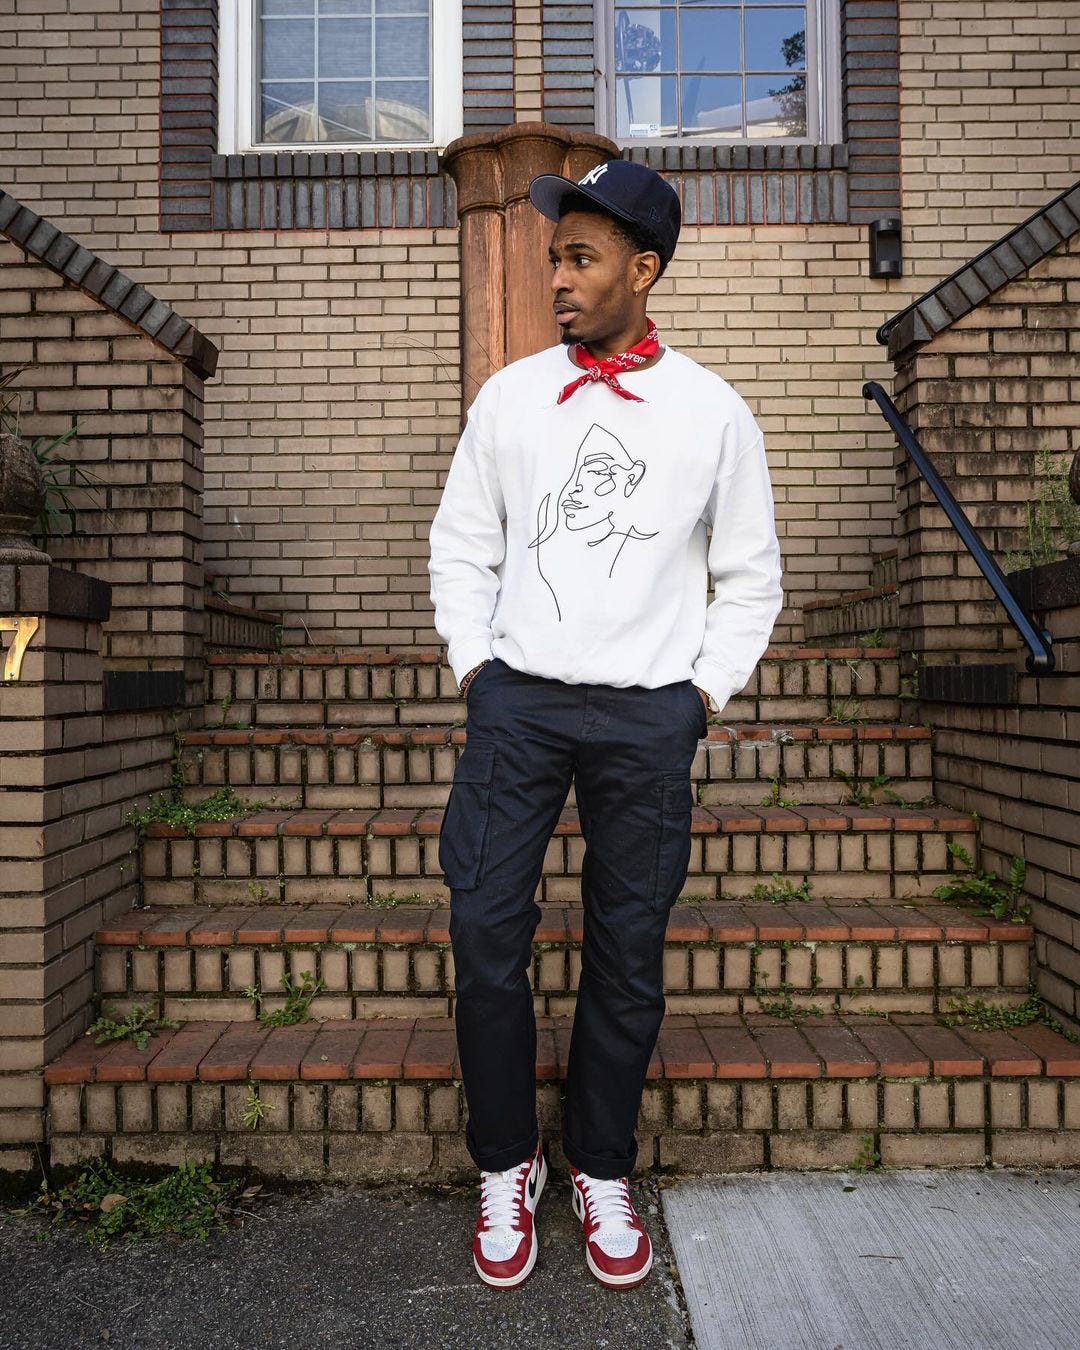 young man in white sweatshirt with red bandana tied around his neck. he's also wearing a dark baseball cap, dark jeans, and white sneakers with red accents